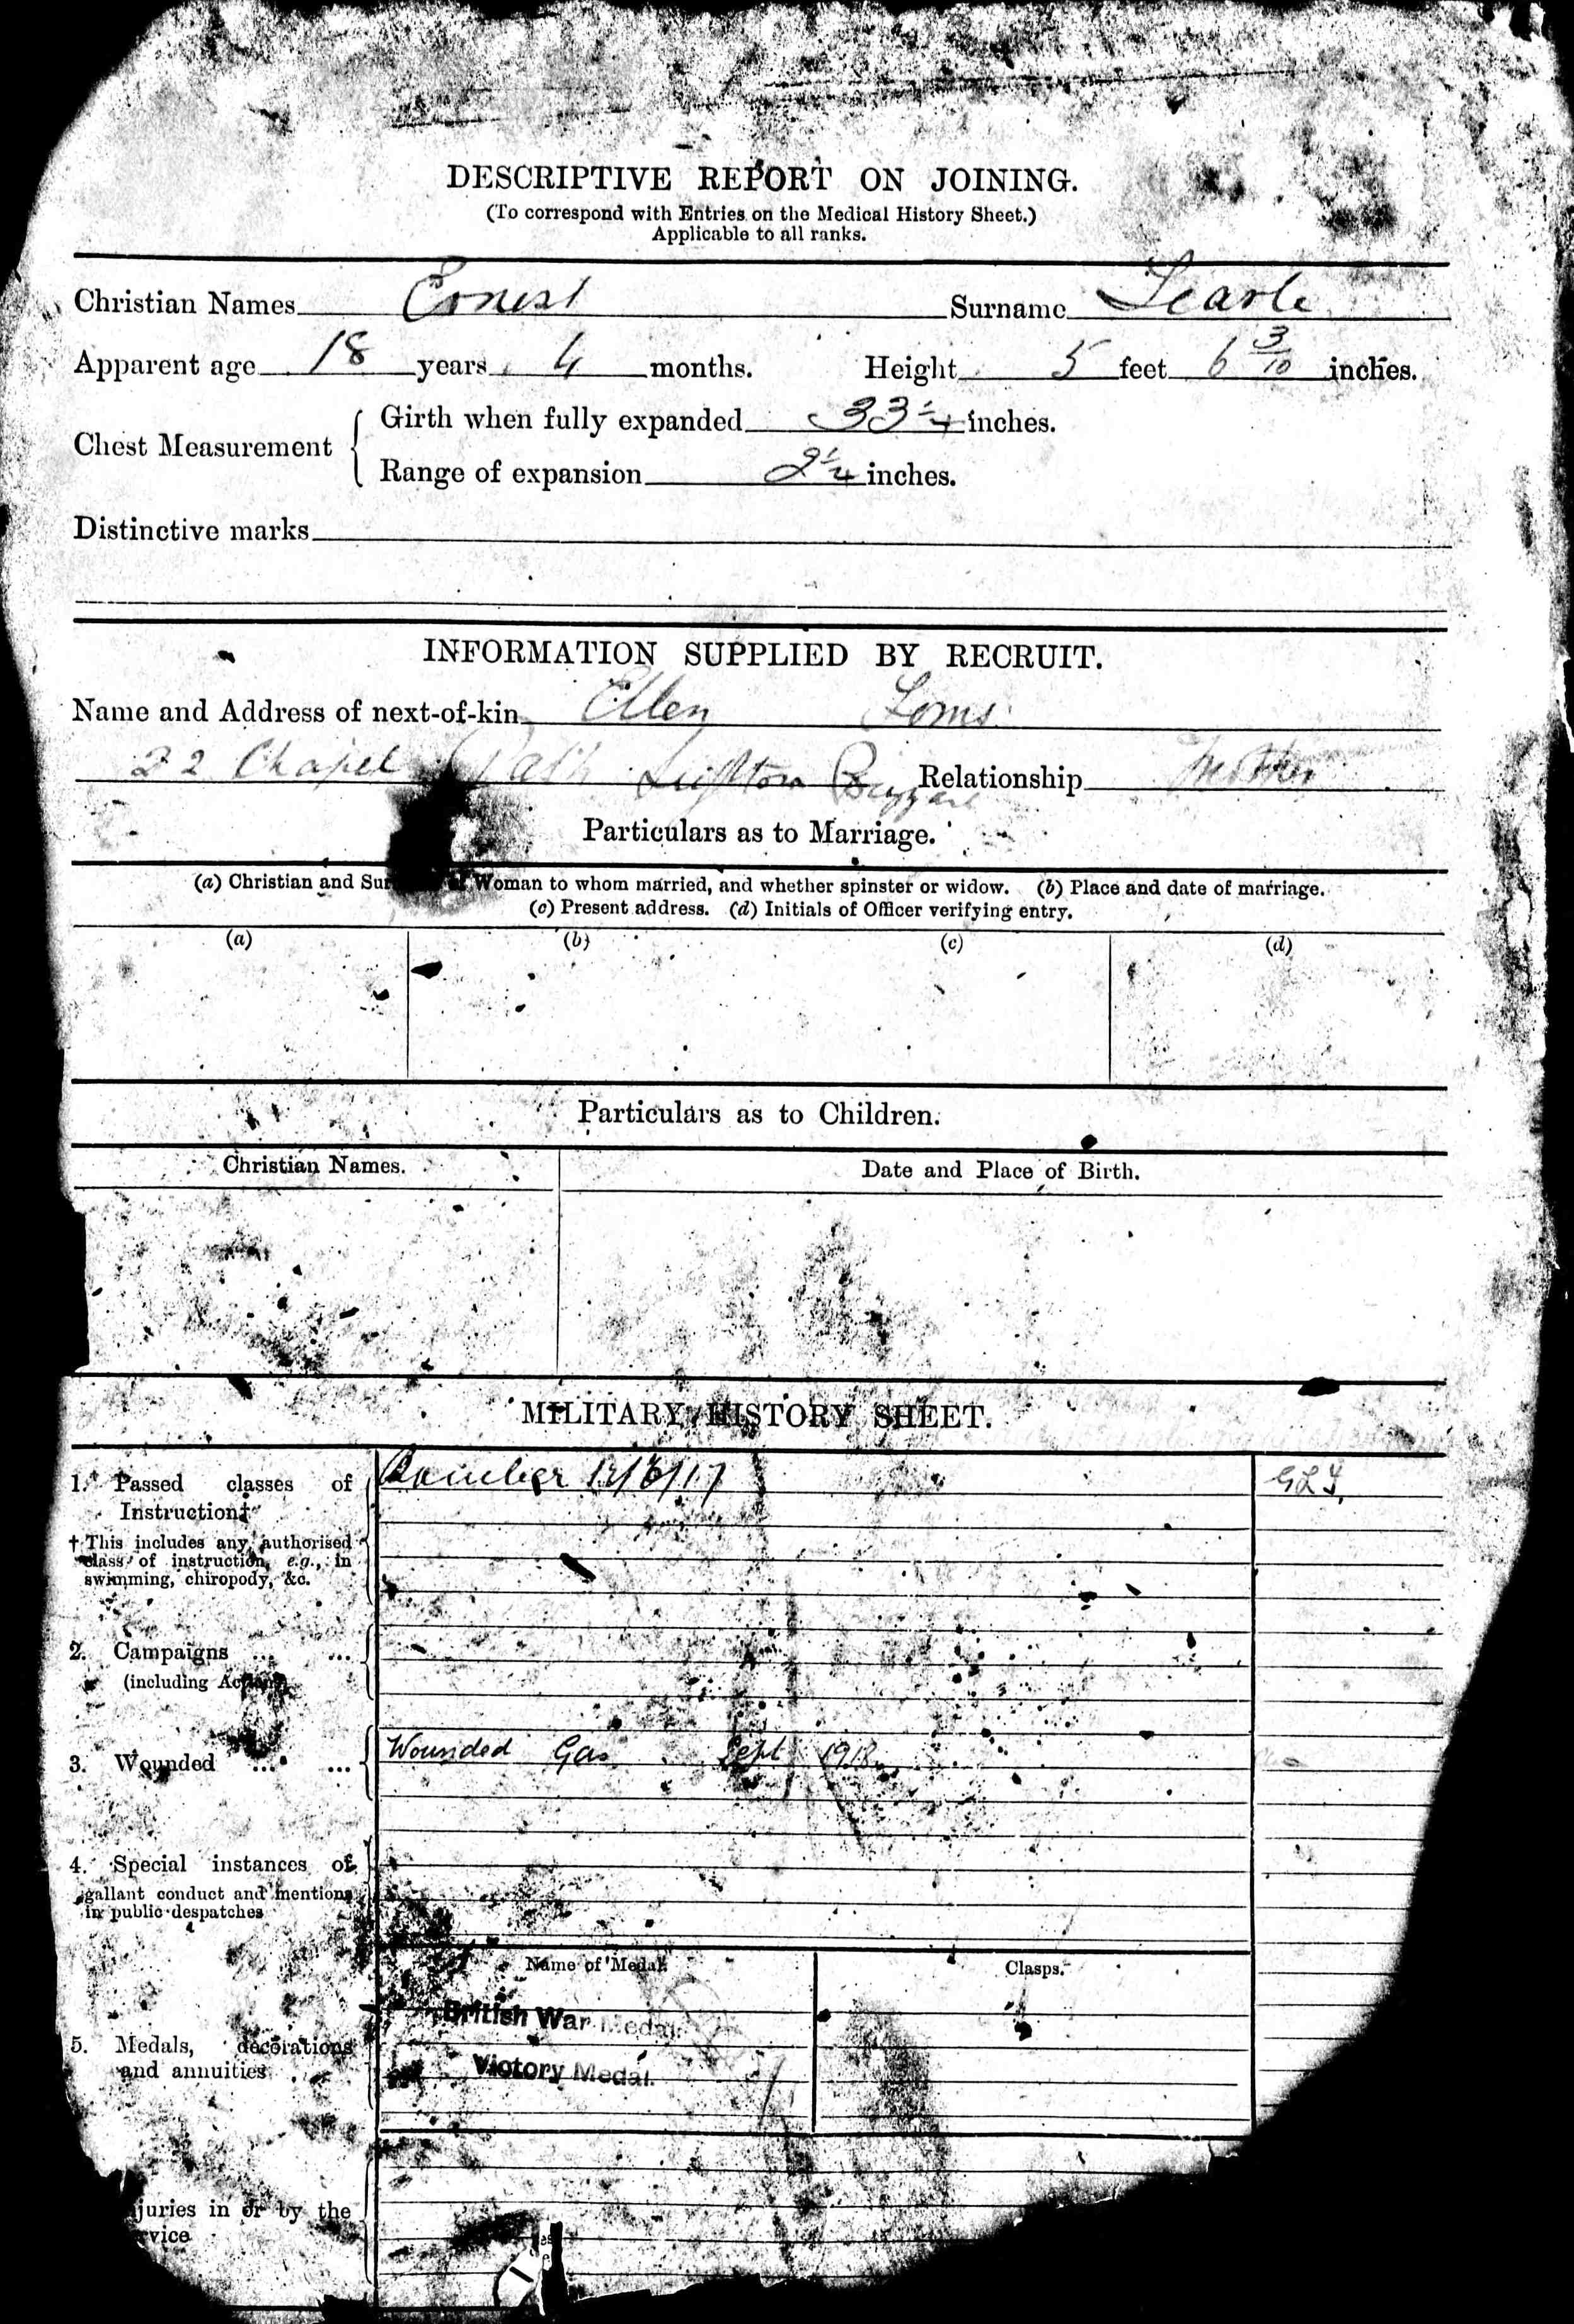 Ernest Tearle 44700 WW1 army service record p2.